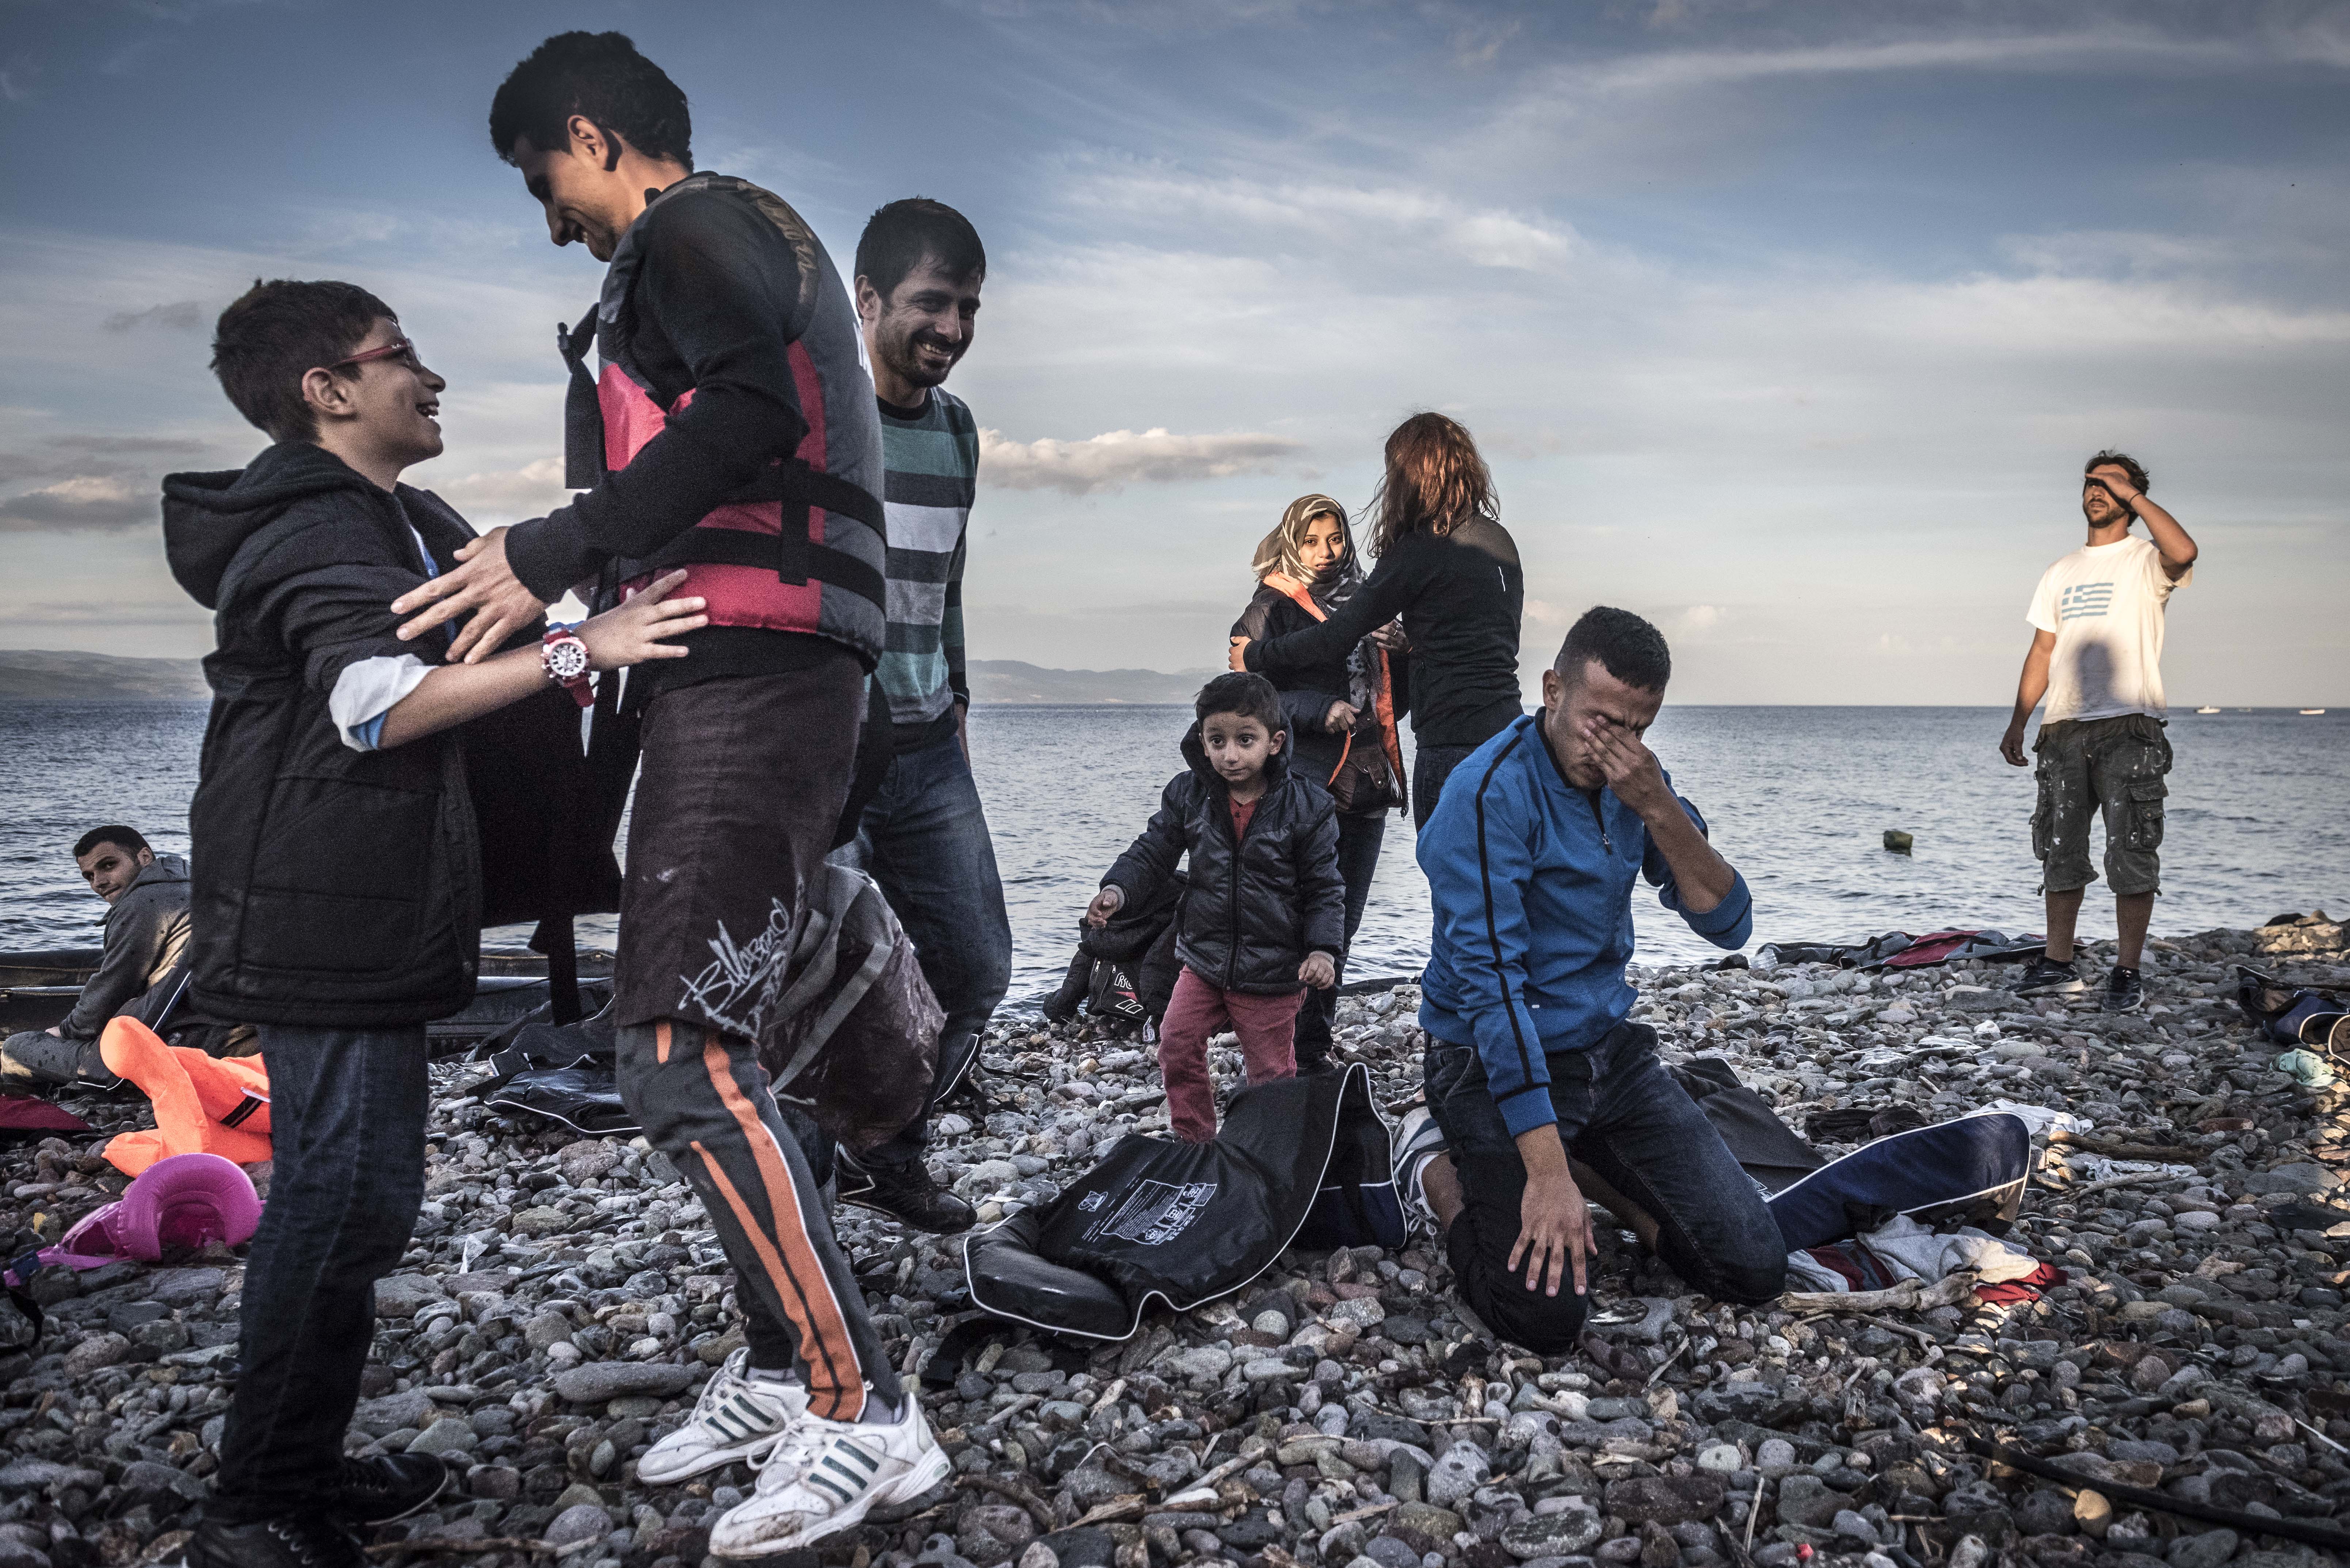 Refugees reacts after arriving safely by broken raft to Lesbos island, Greece, Monday October, 12, 2015. (Photo Sergey Ponomarev for The New York Times)